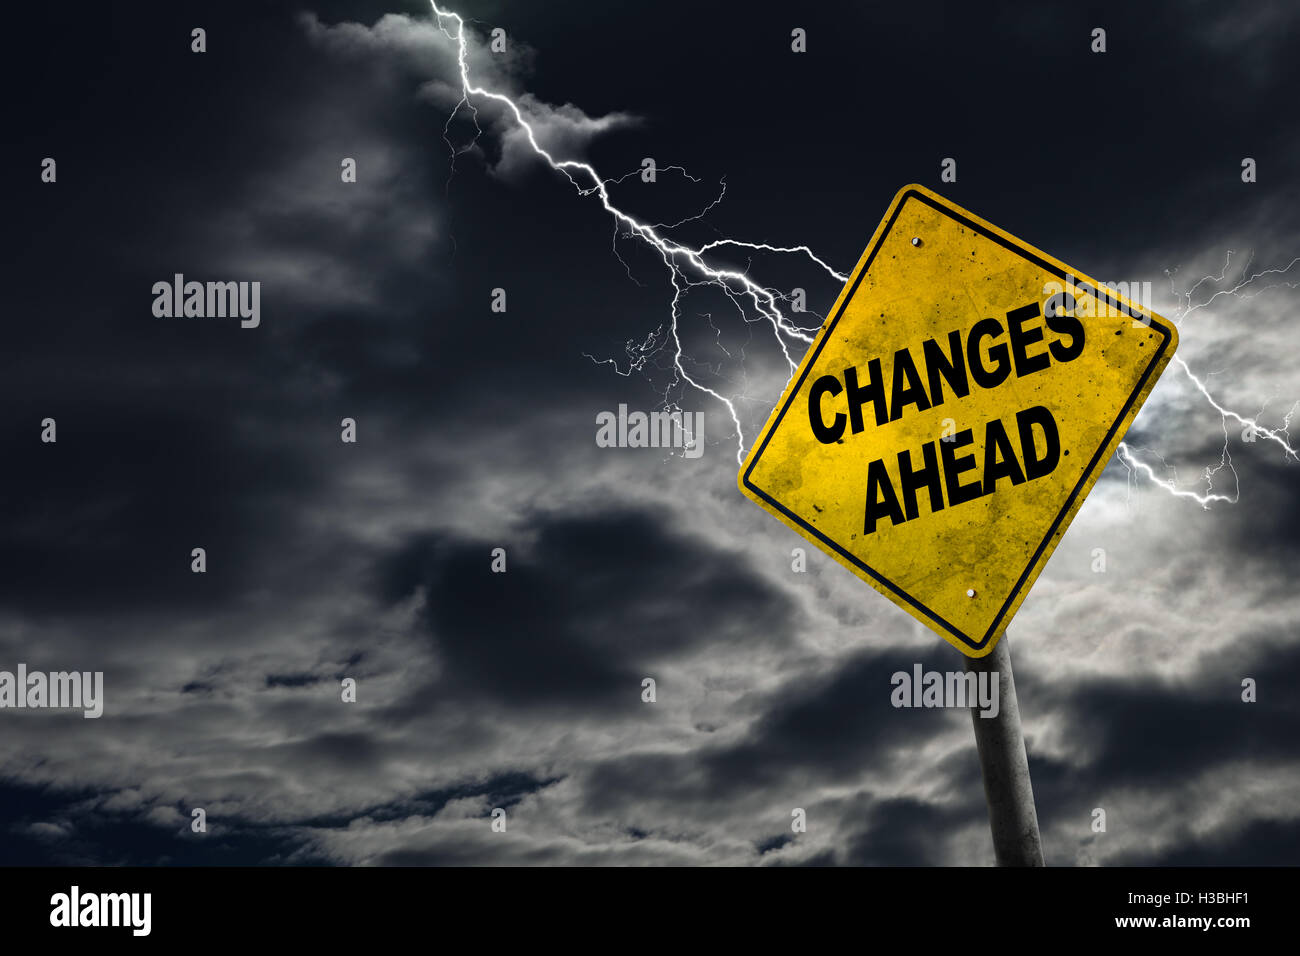 Changes Ahead sign against a stormy background with lightning and copy space. Concept of bad things to come. Stock Photo